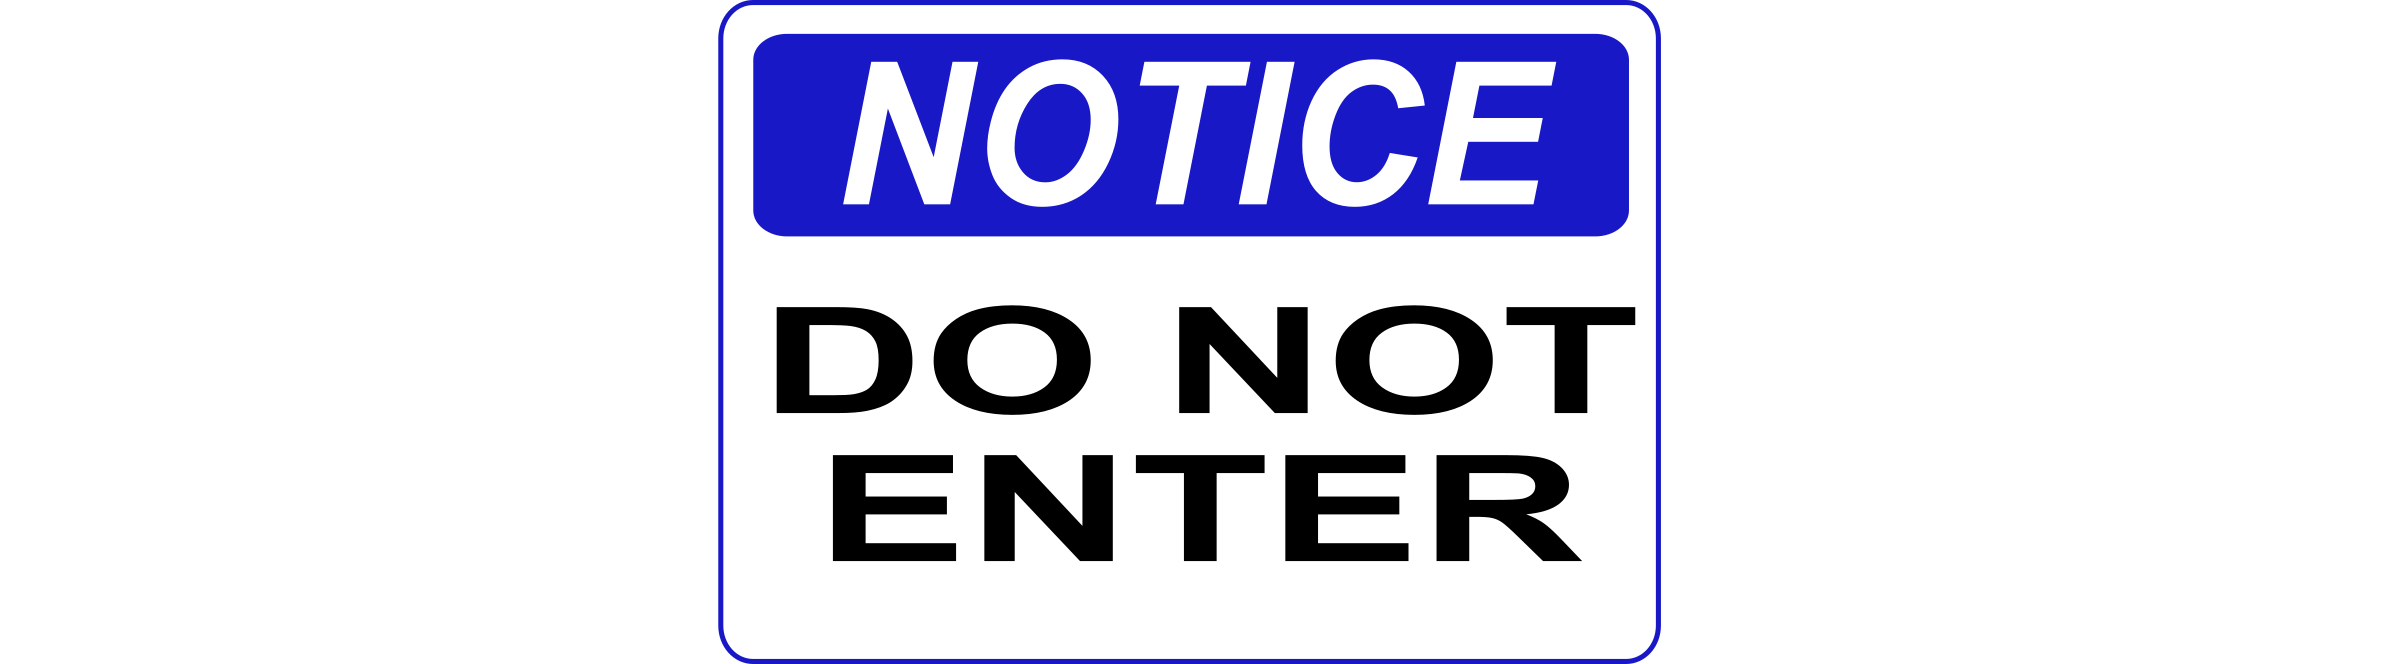 Notice   Do Not Enter By Rfc1394